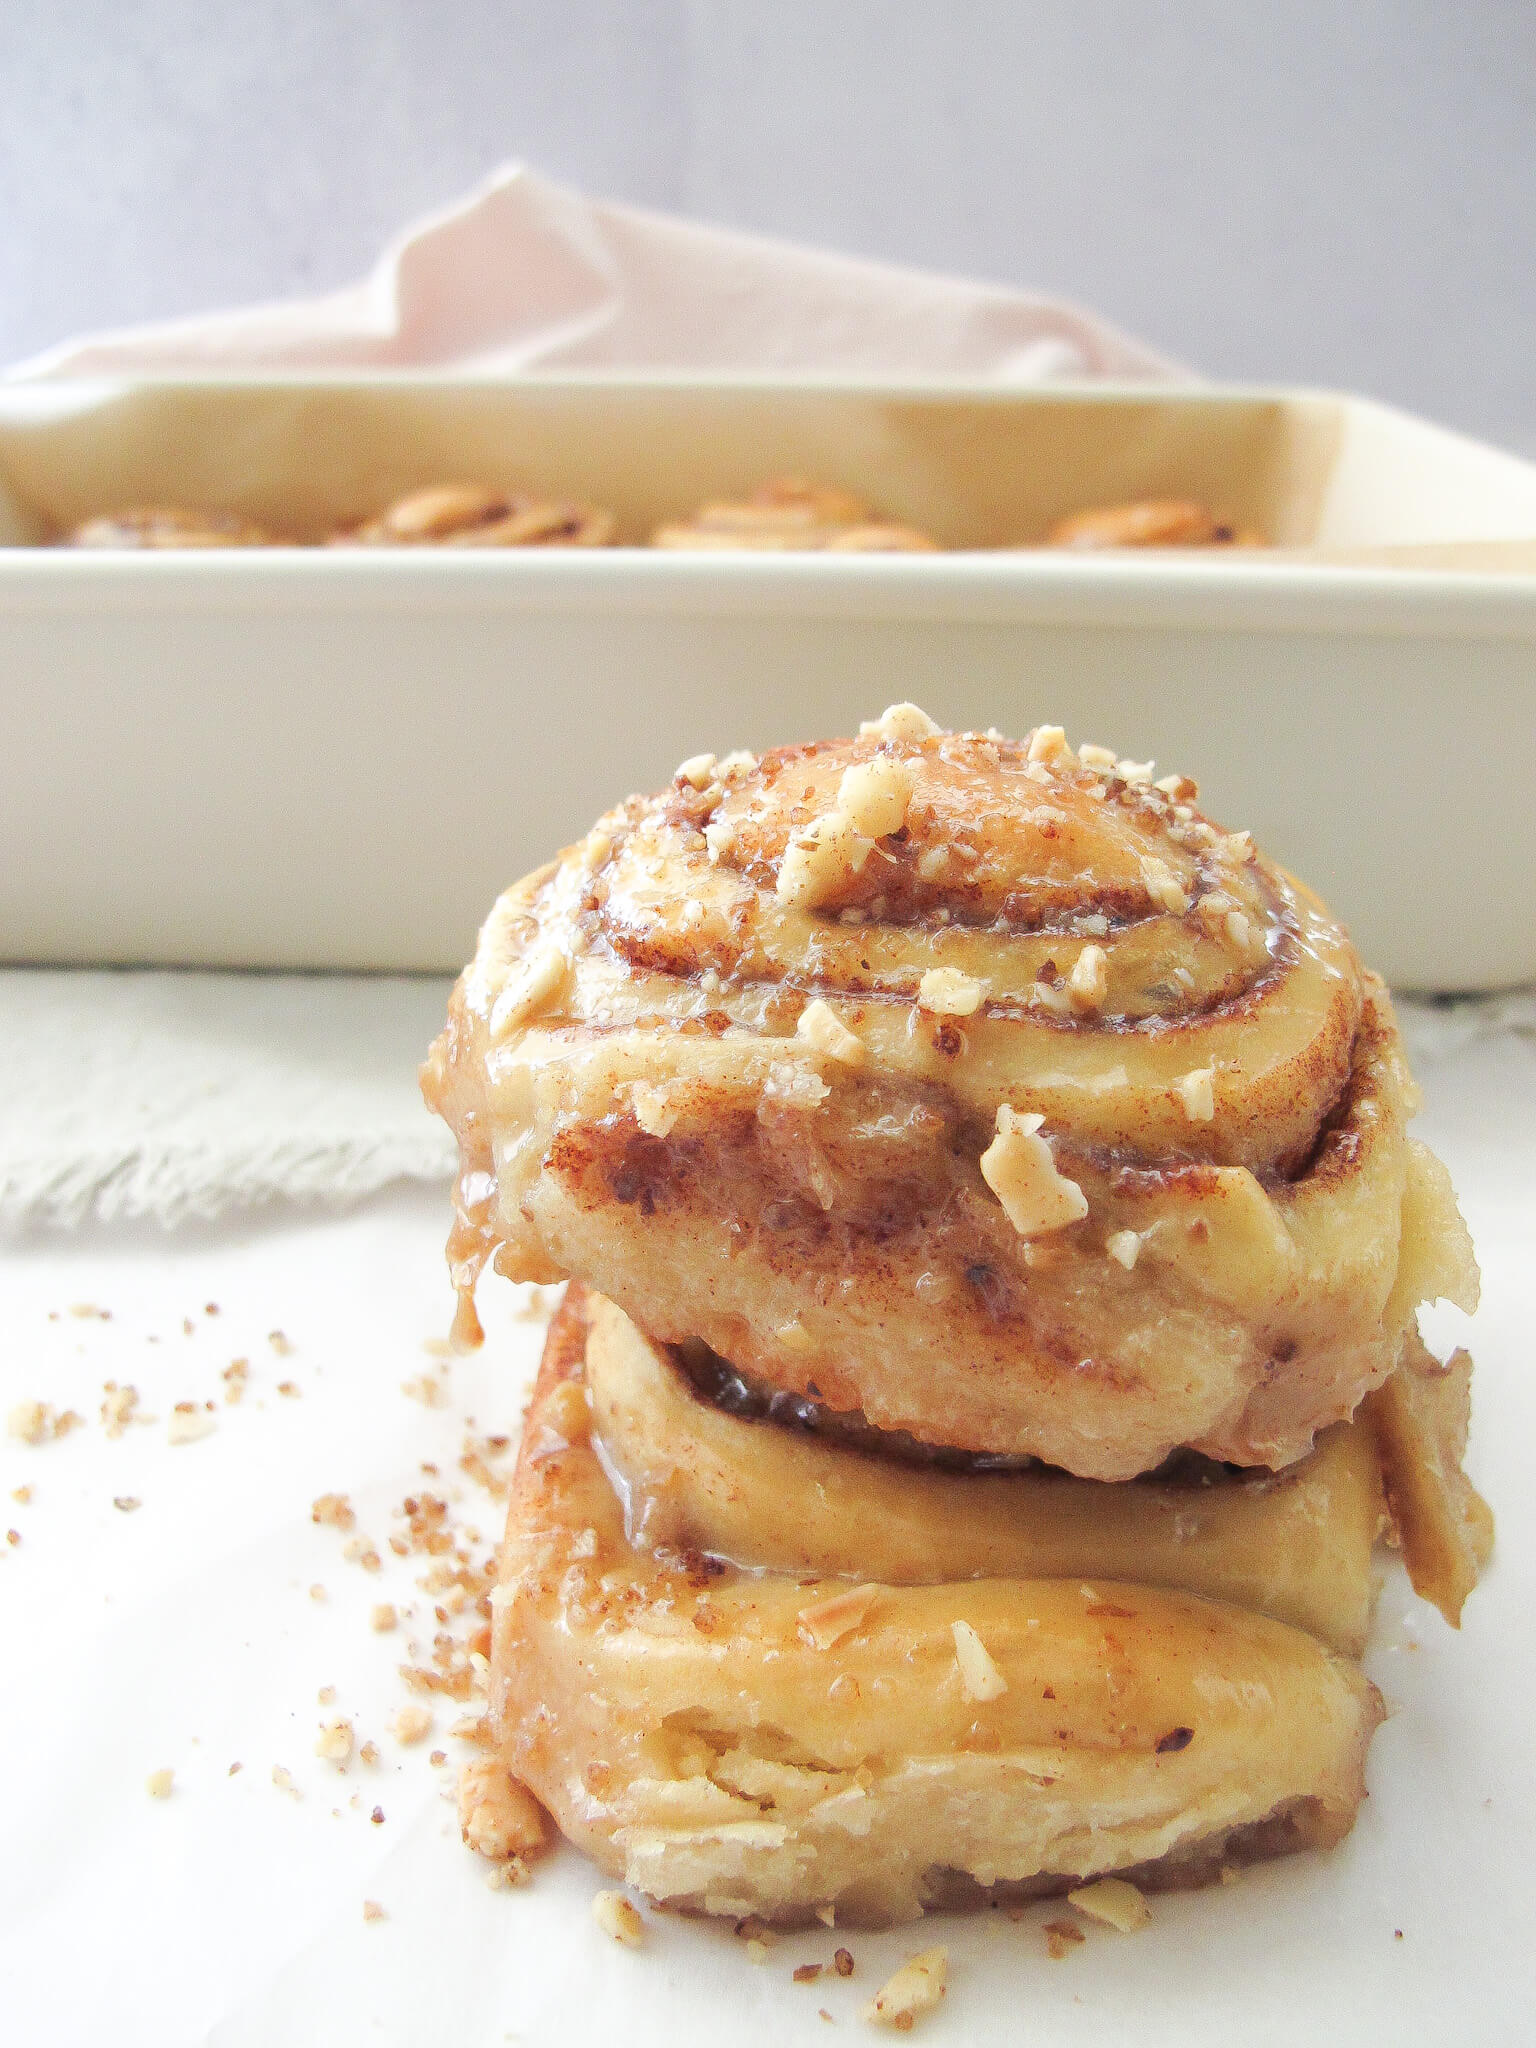 baklava cinnamon rolls with icing and ground walnuts and almonds